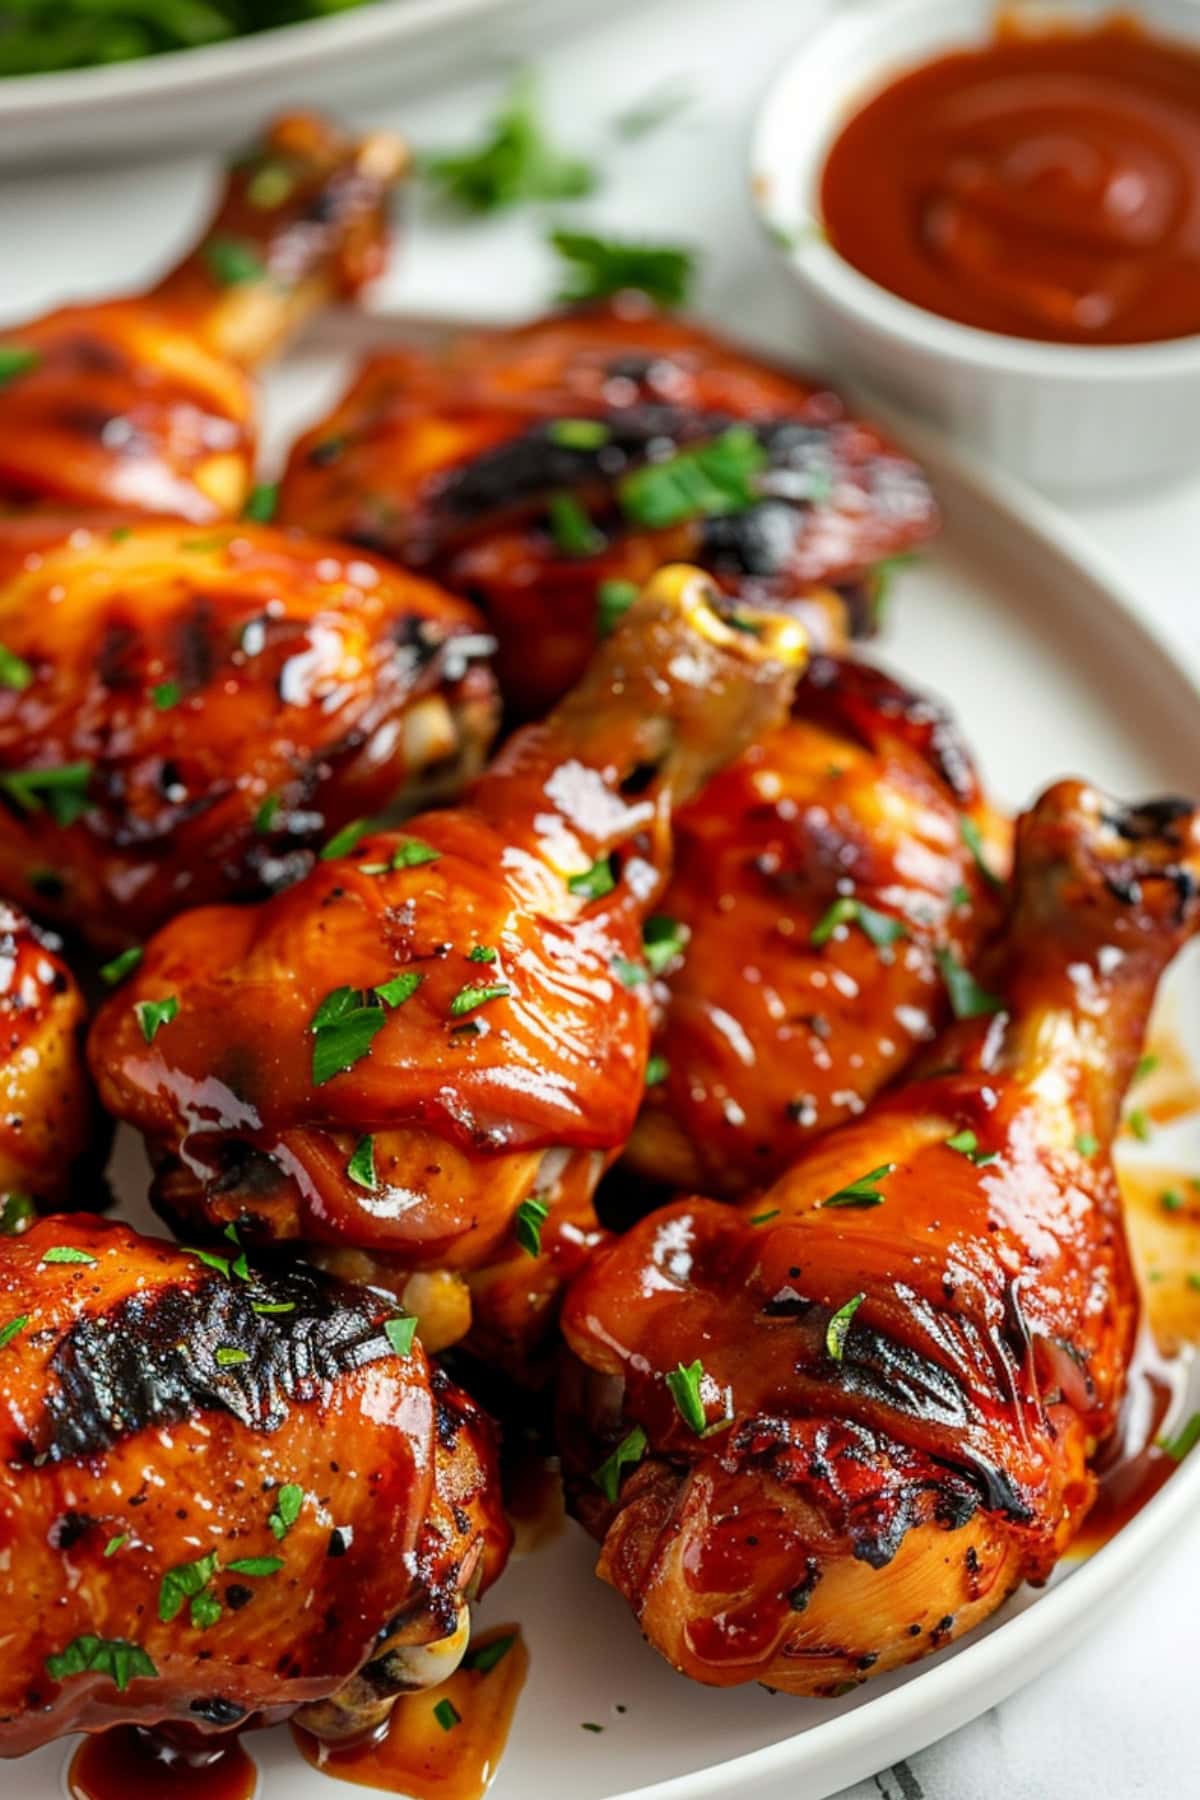 Close-up of a plate of bbq chicken with a bowl of dipping sauce on the side.